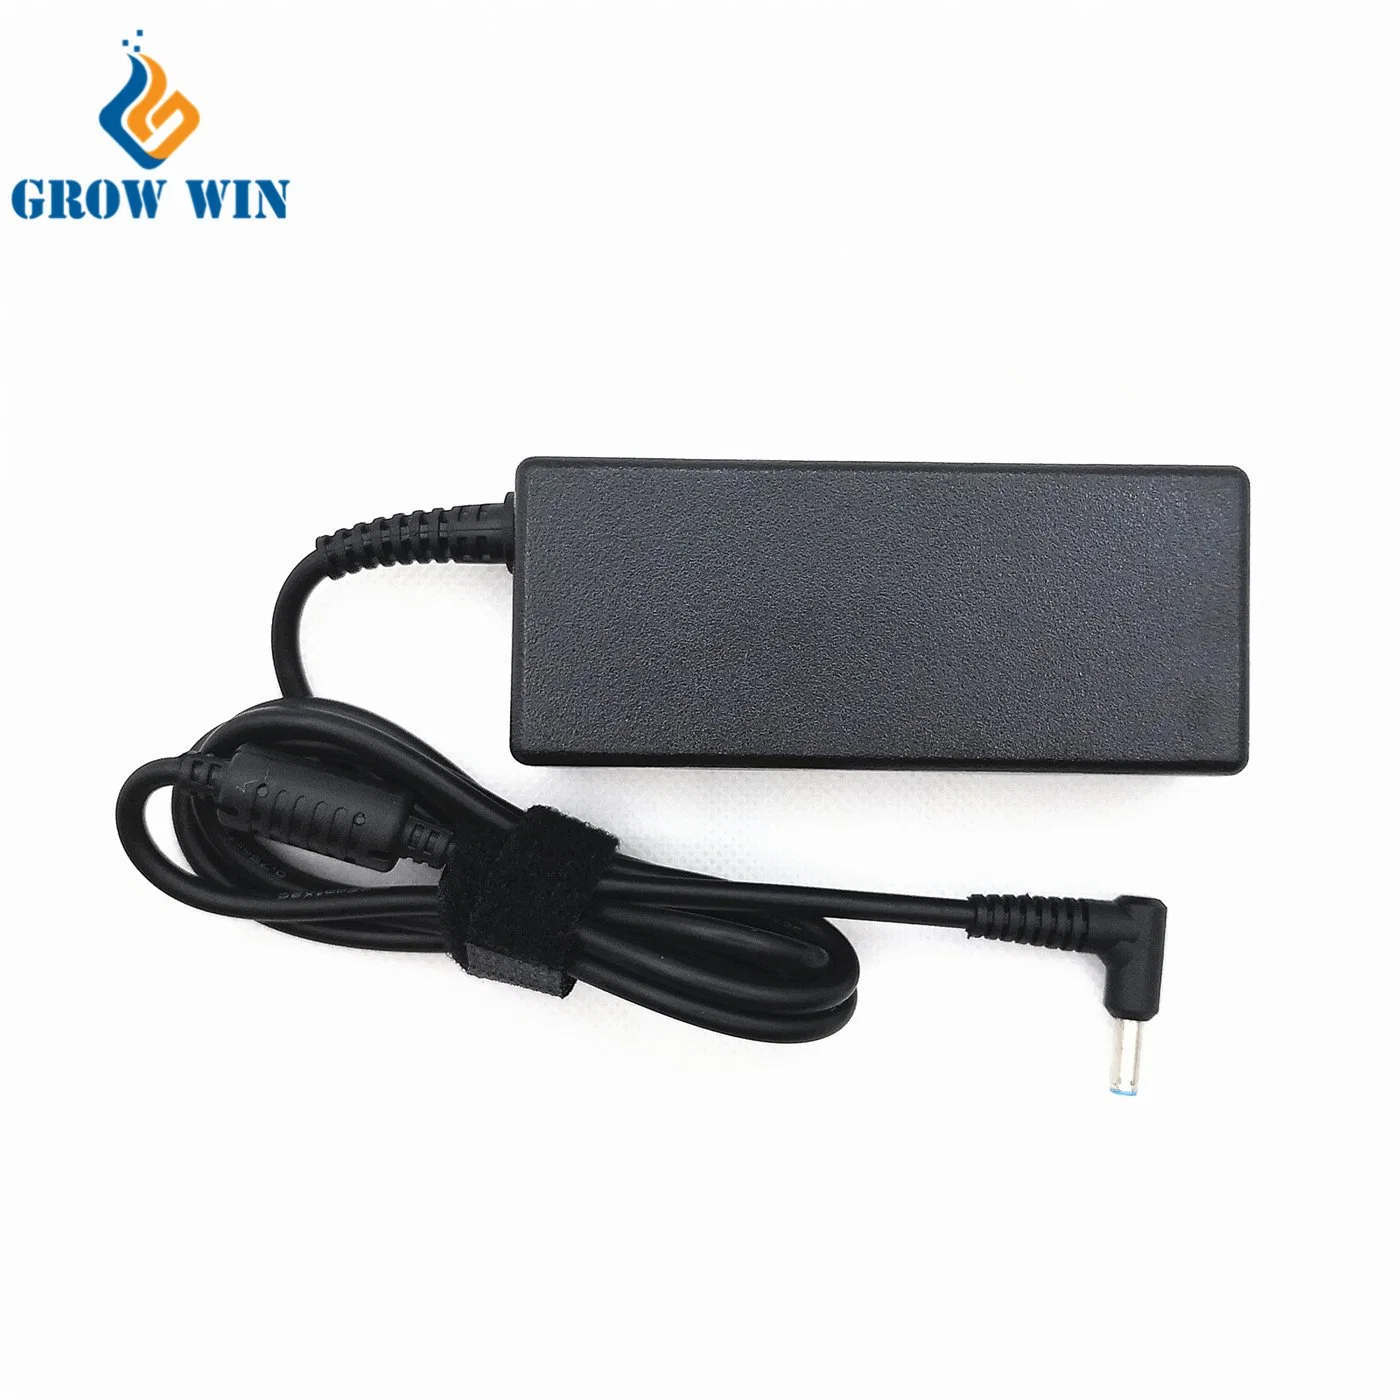 Growwin Laptop Battery Charger 19.5V 3.33A Power Adapter for HP